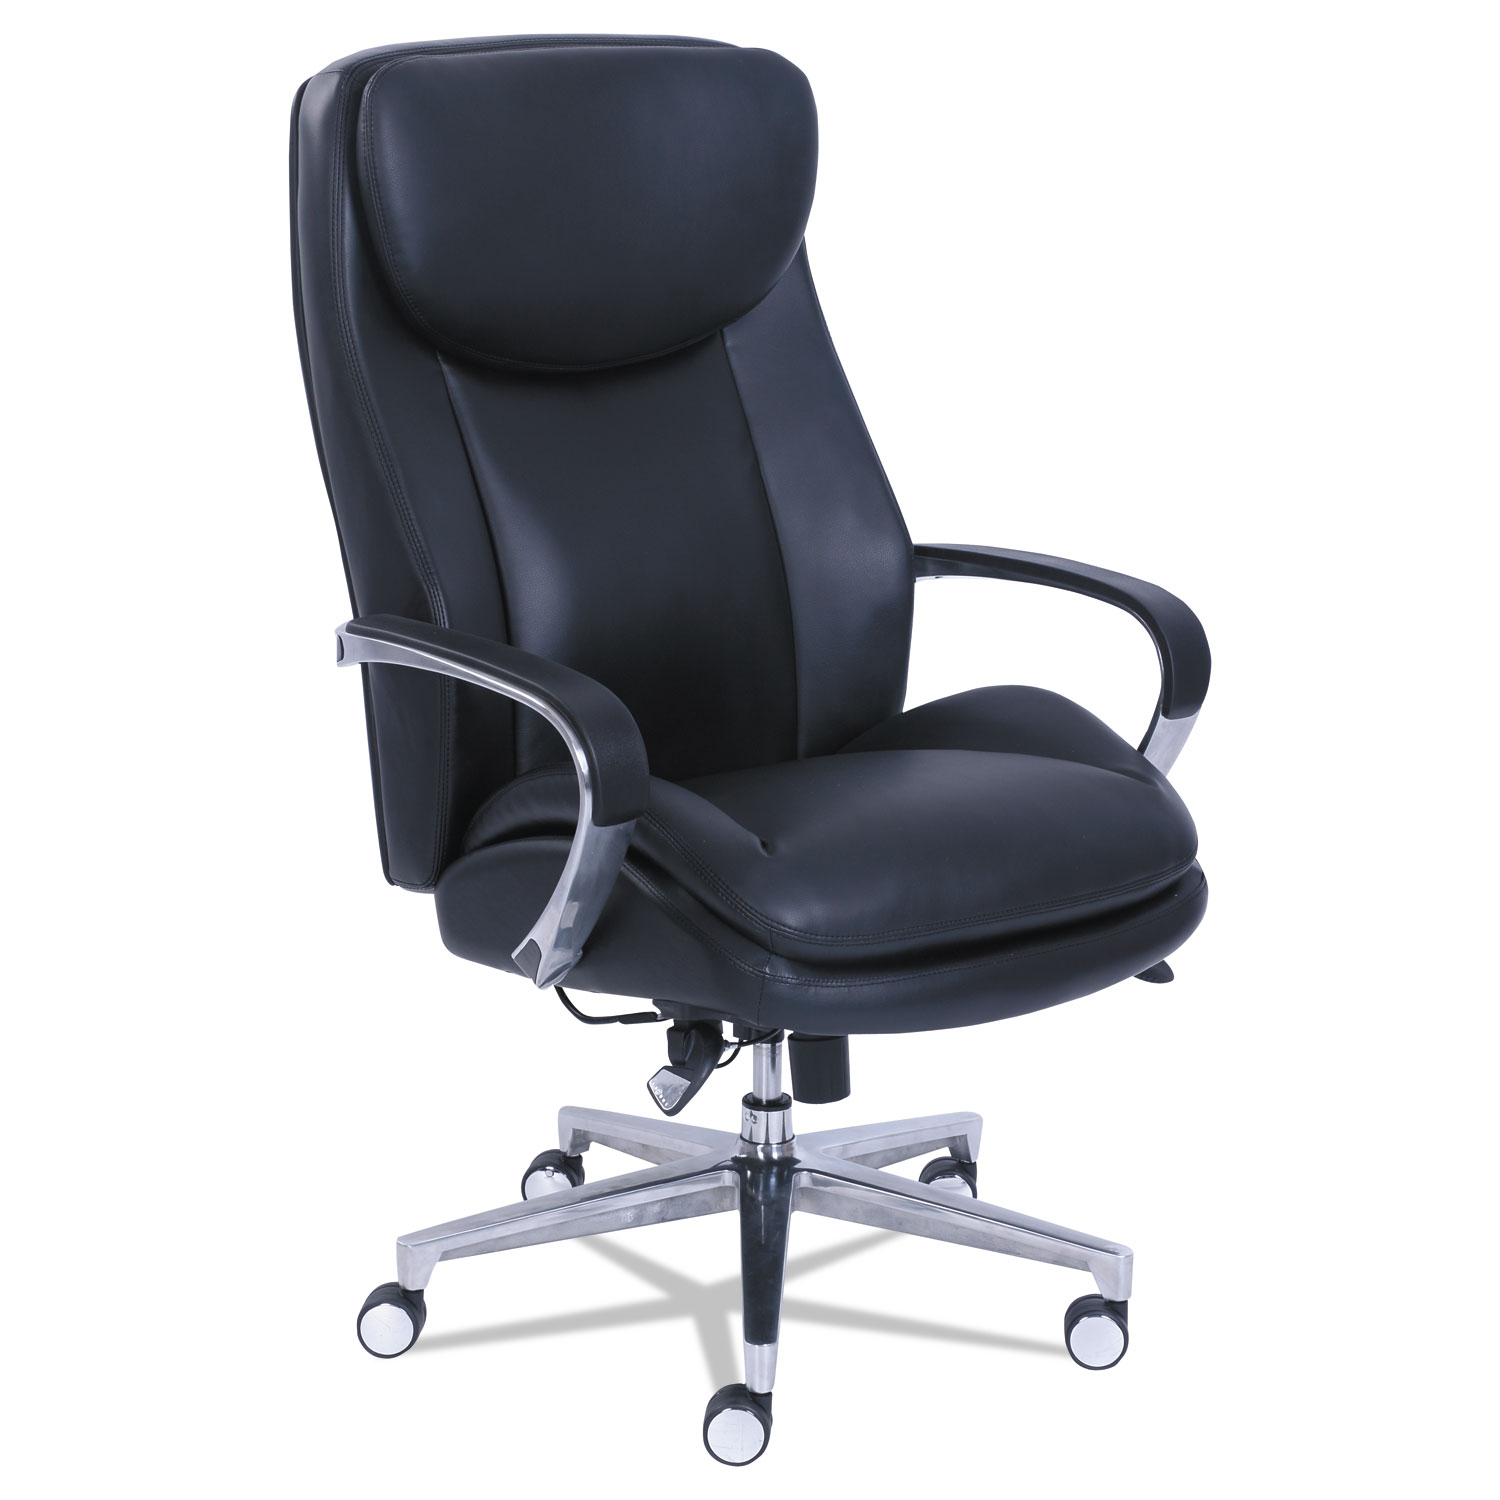  La-Z-Boy 48956 Commercial 2000 Big and Tall Executive Chair with Dynamic Lumbar Support, Up to 400 lbs., Black Seat/Back, Silver Base (LZB48956) 